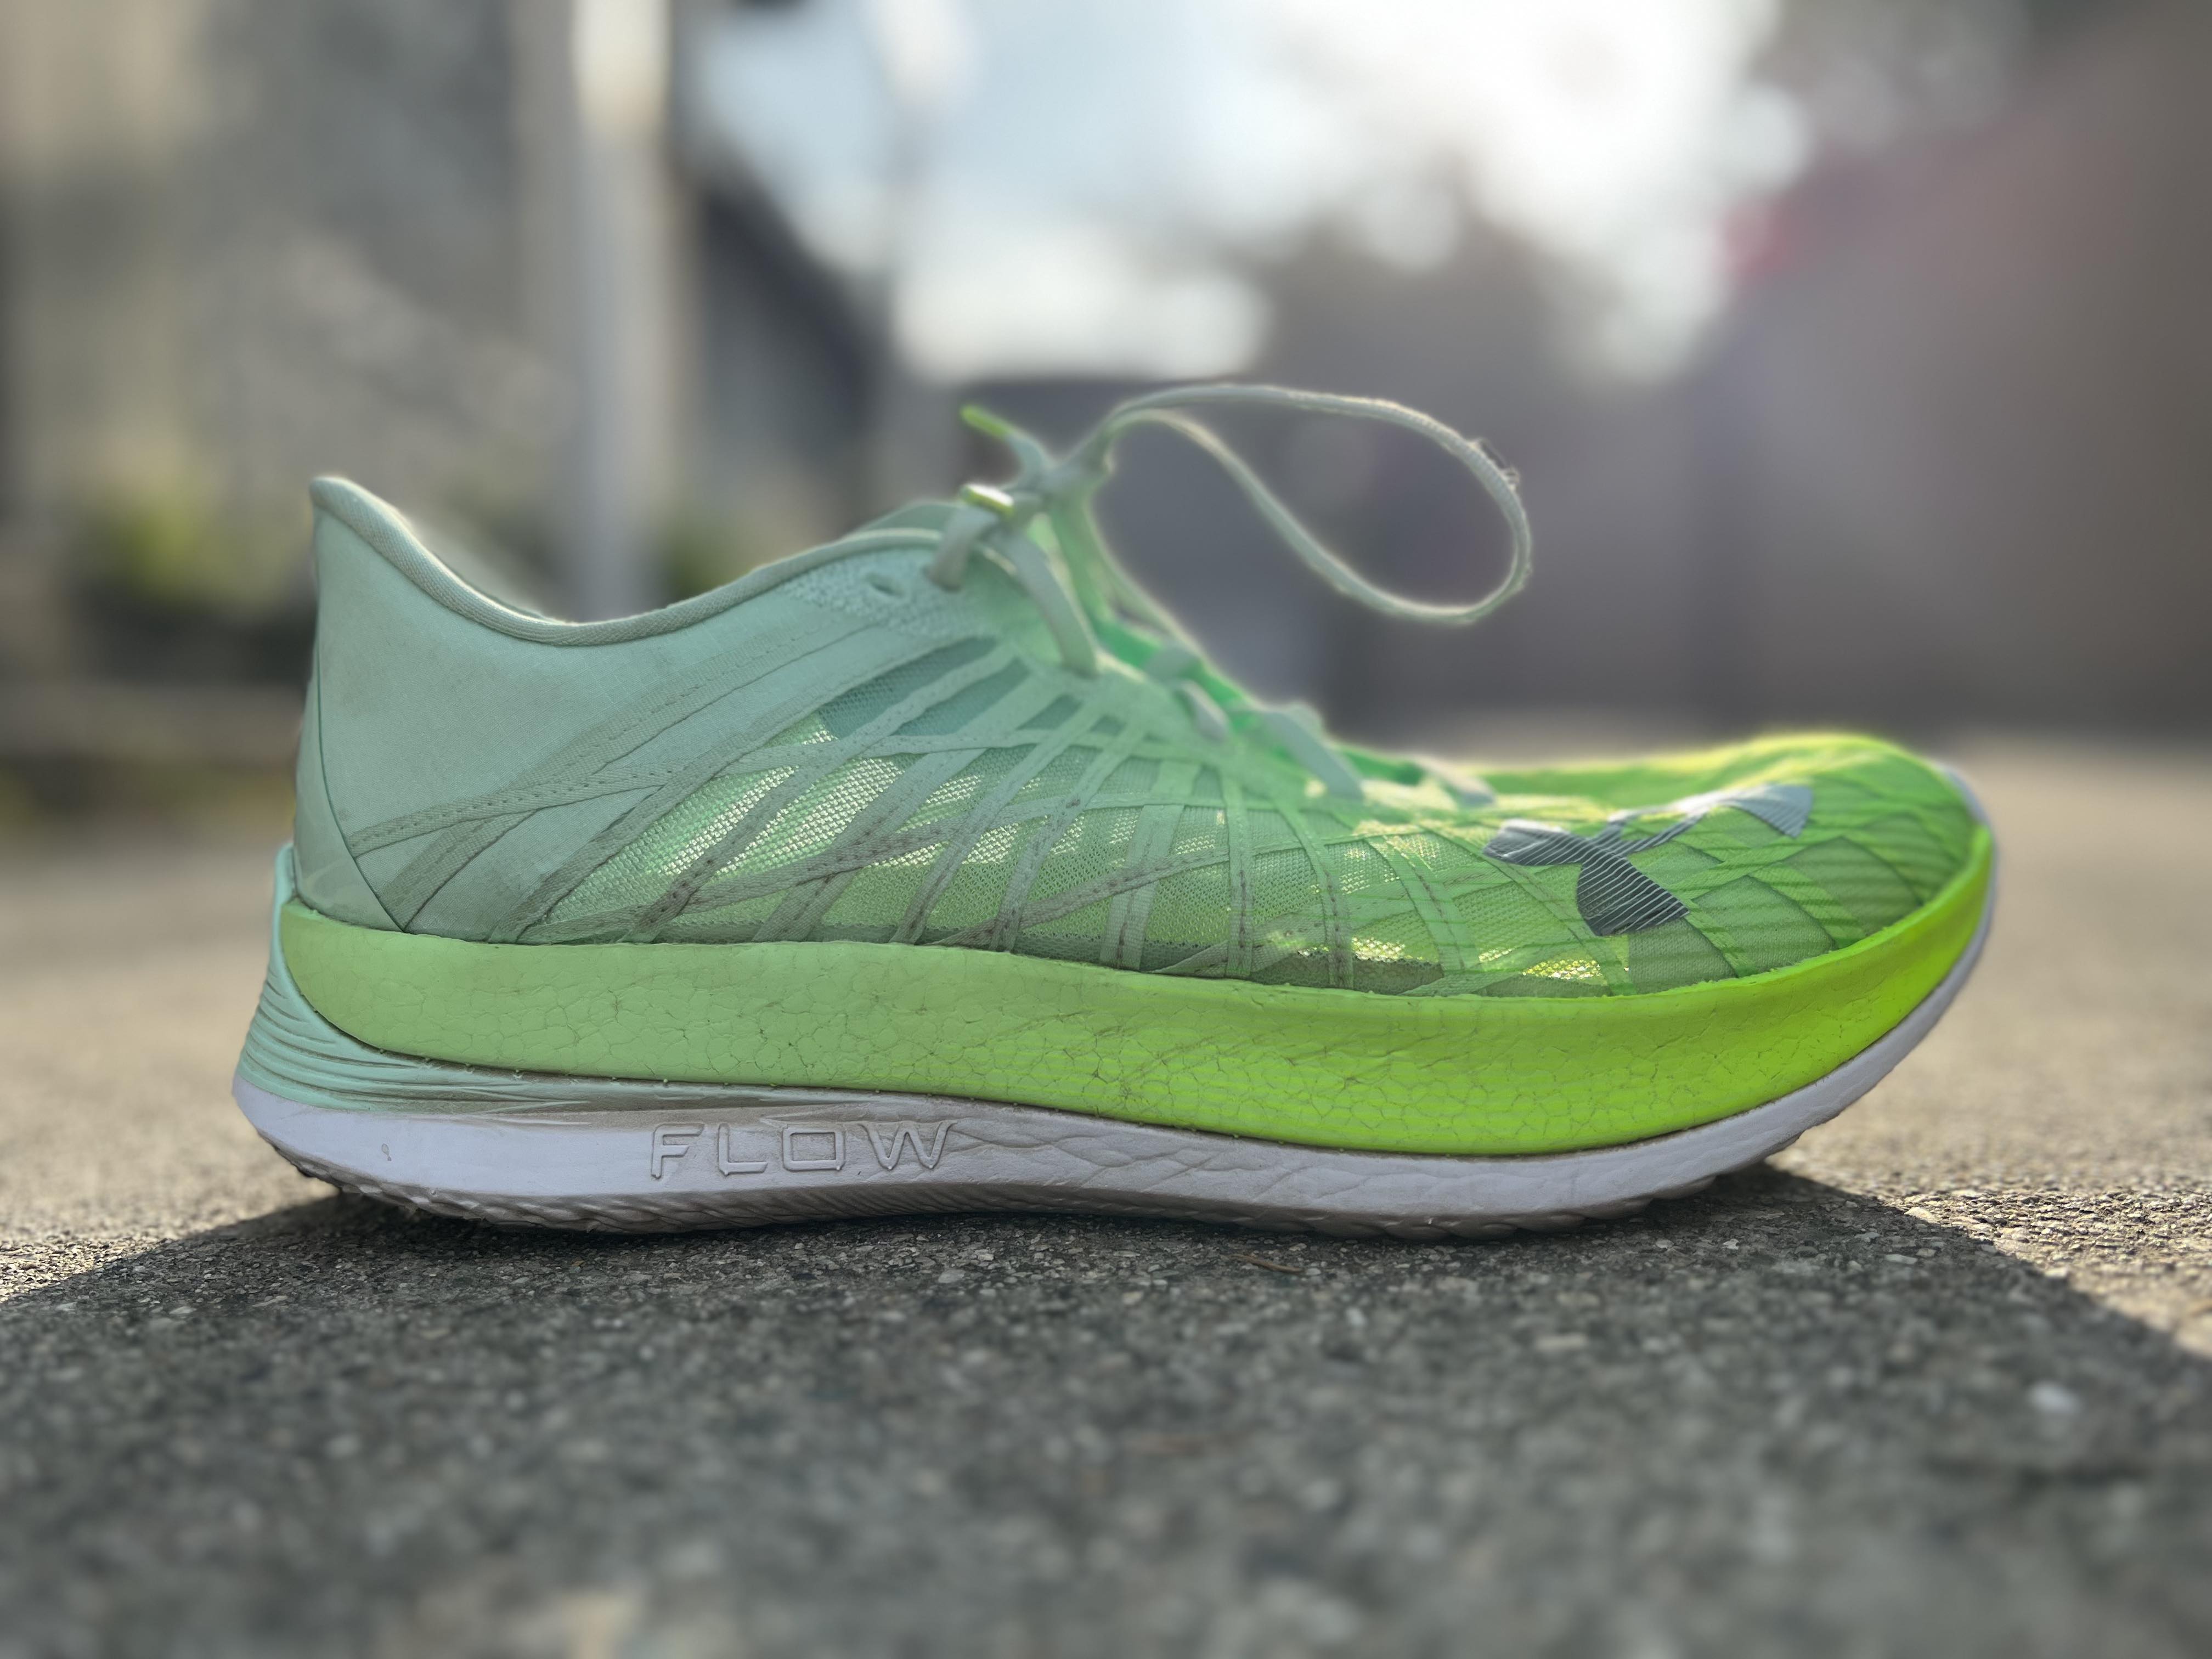 Under Armour Flow Velociti Elite Review (2022 Release) - DOCTORS OF RUNNING